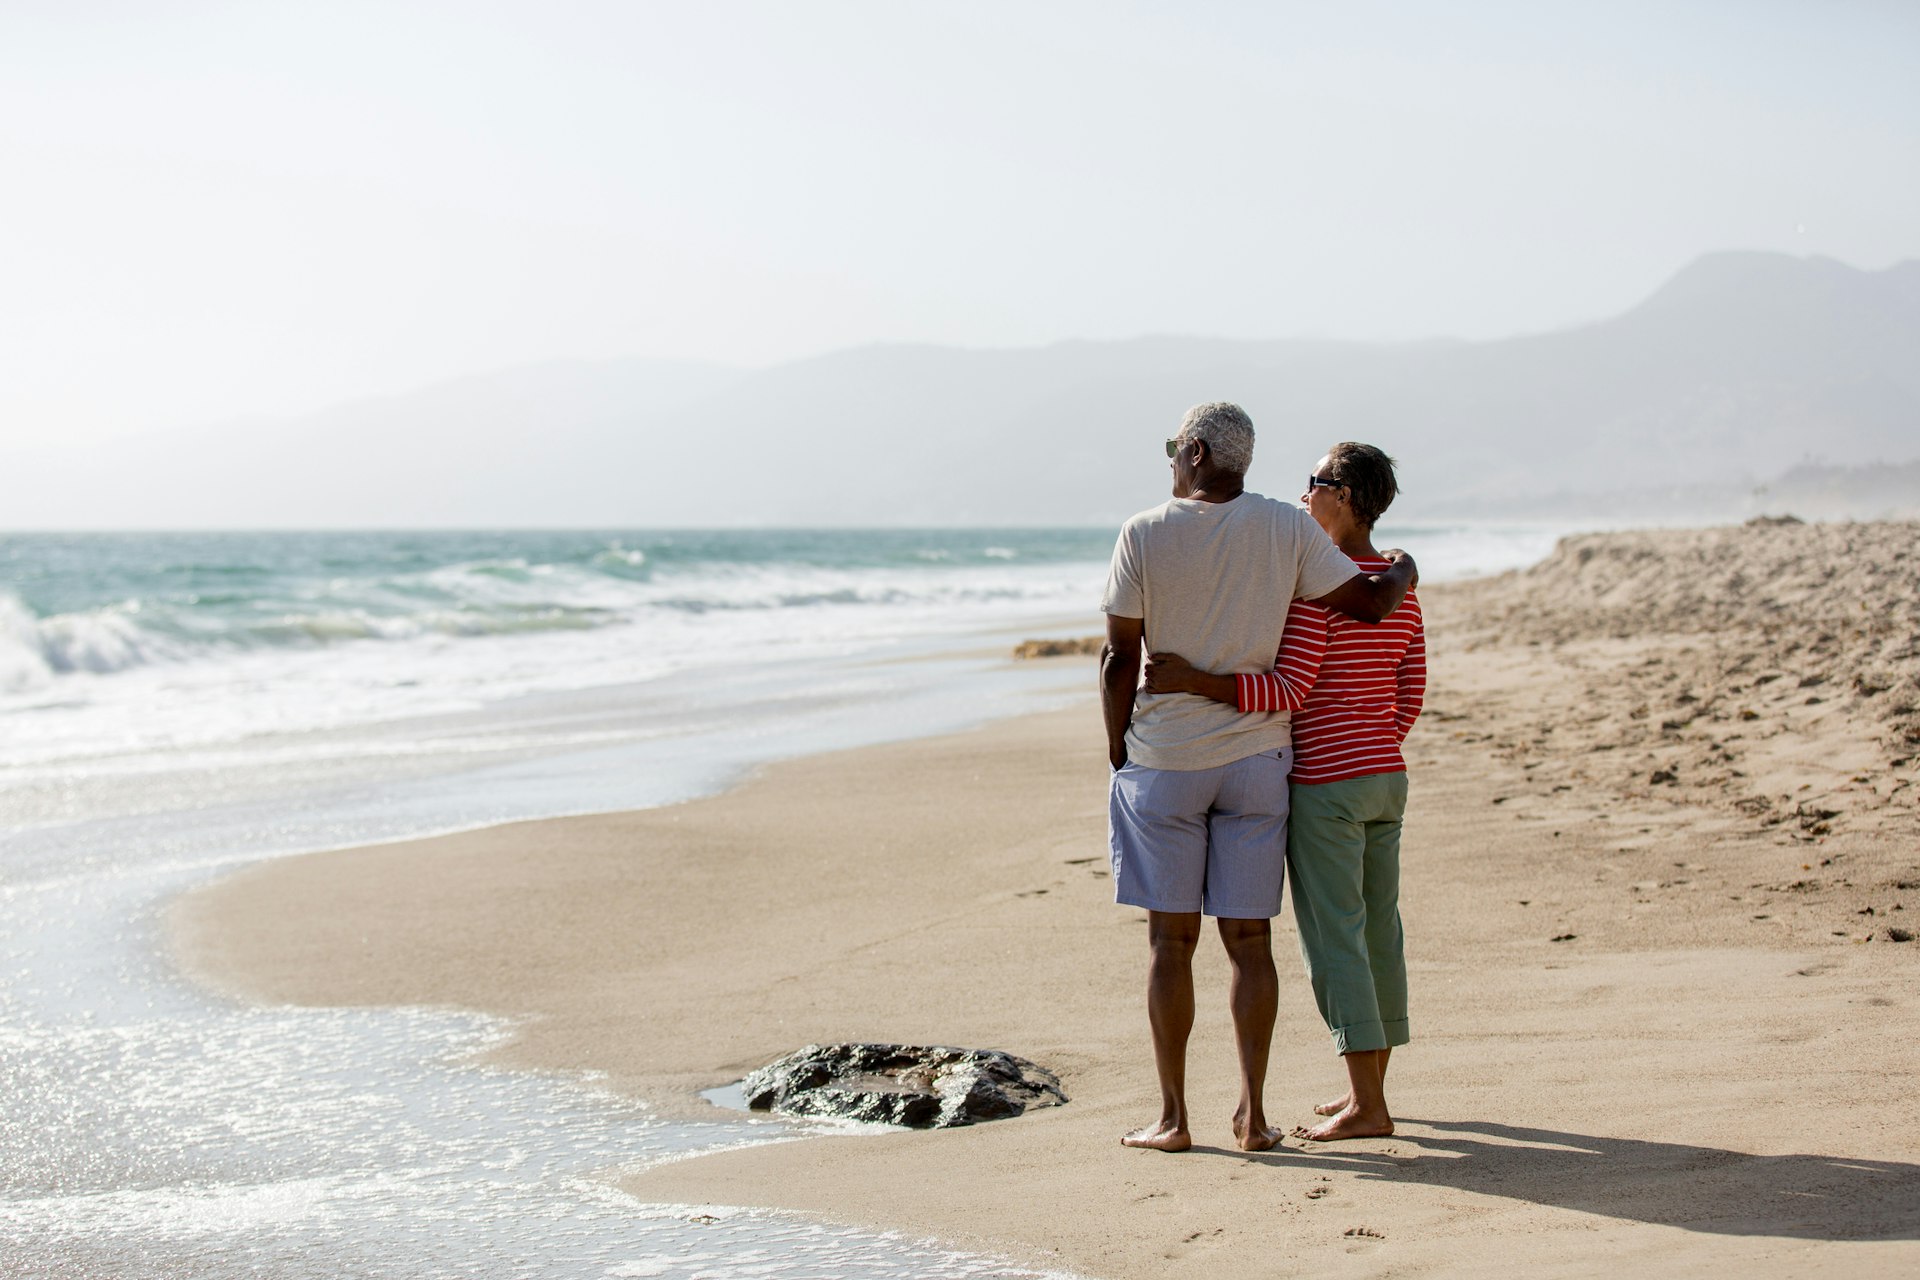 A senior couple stands together on the sand looking out to sea